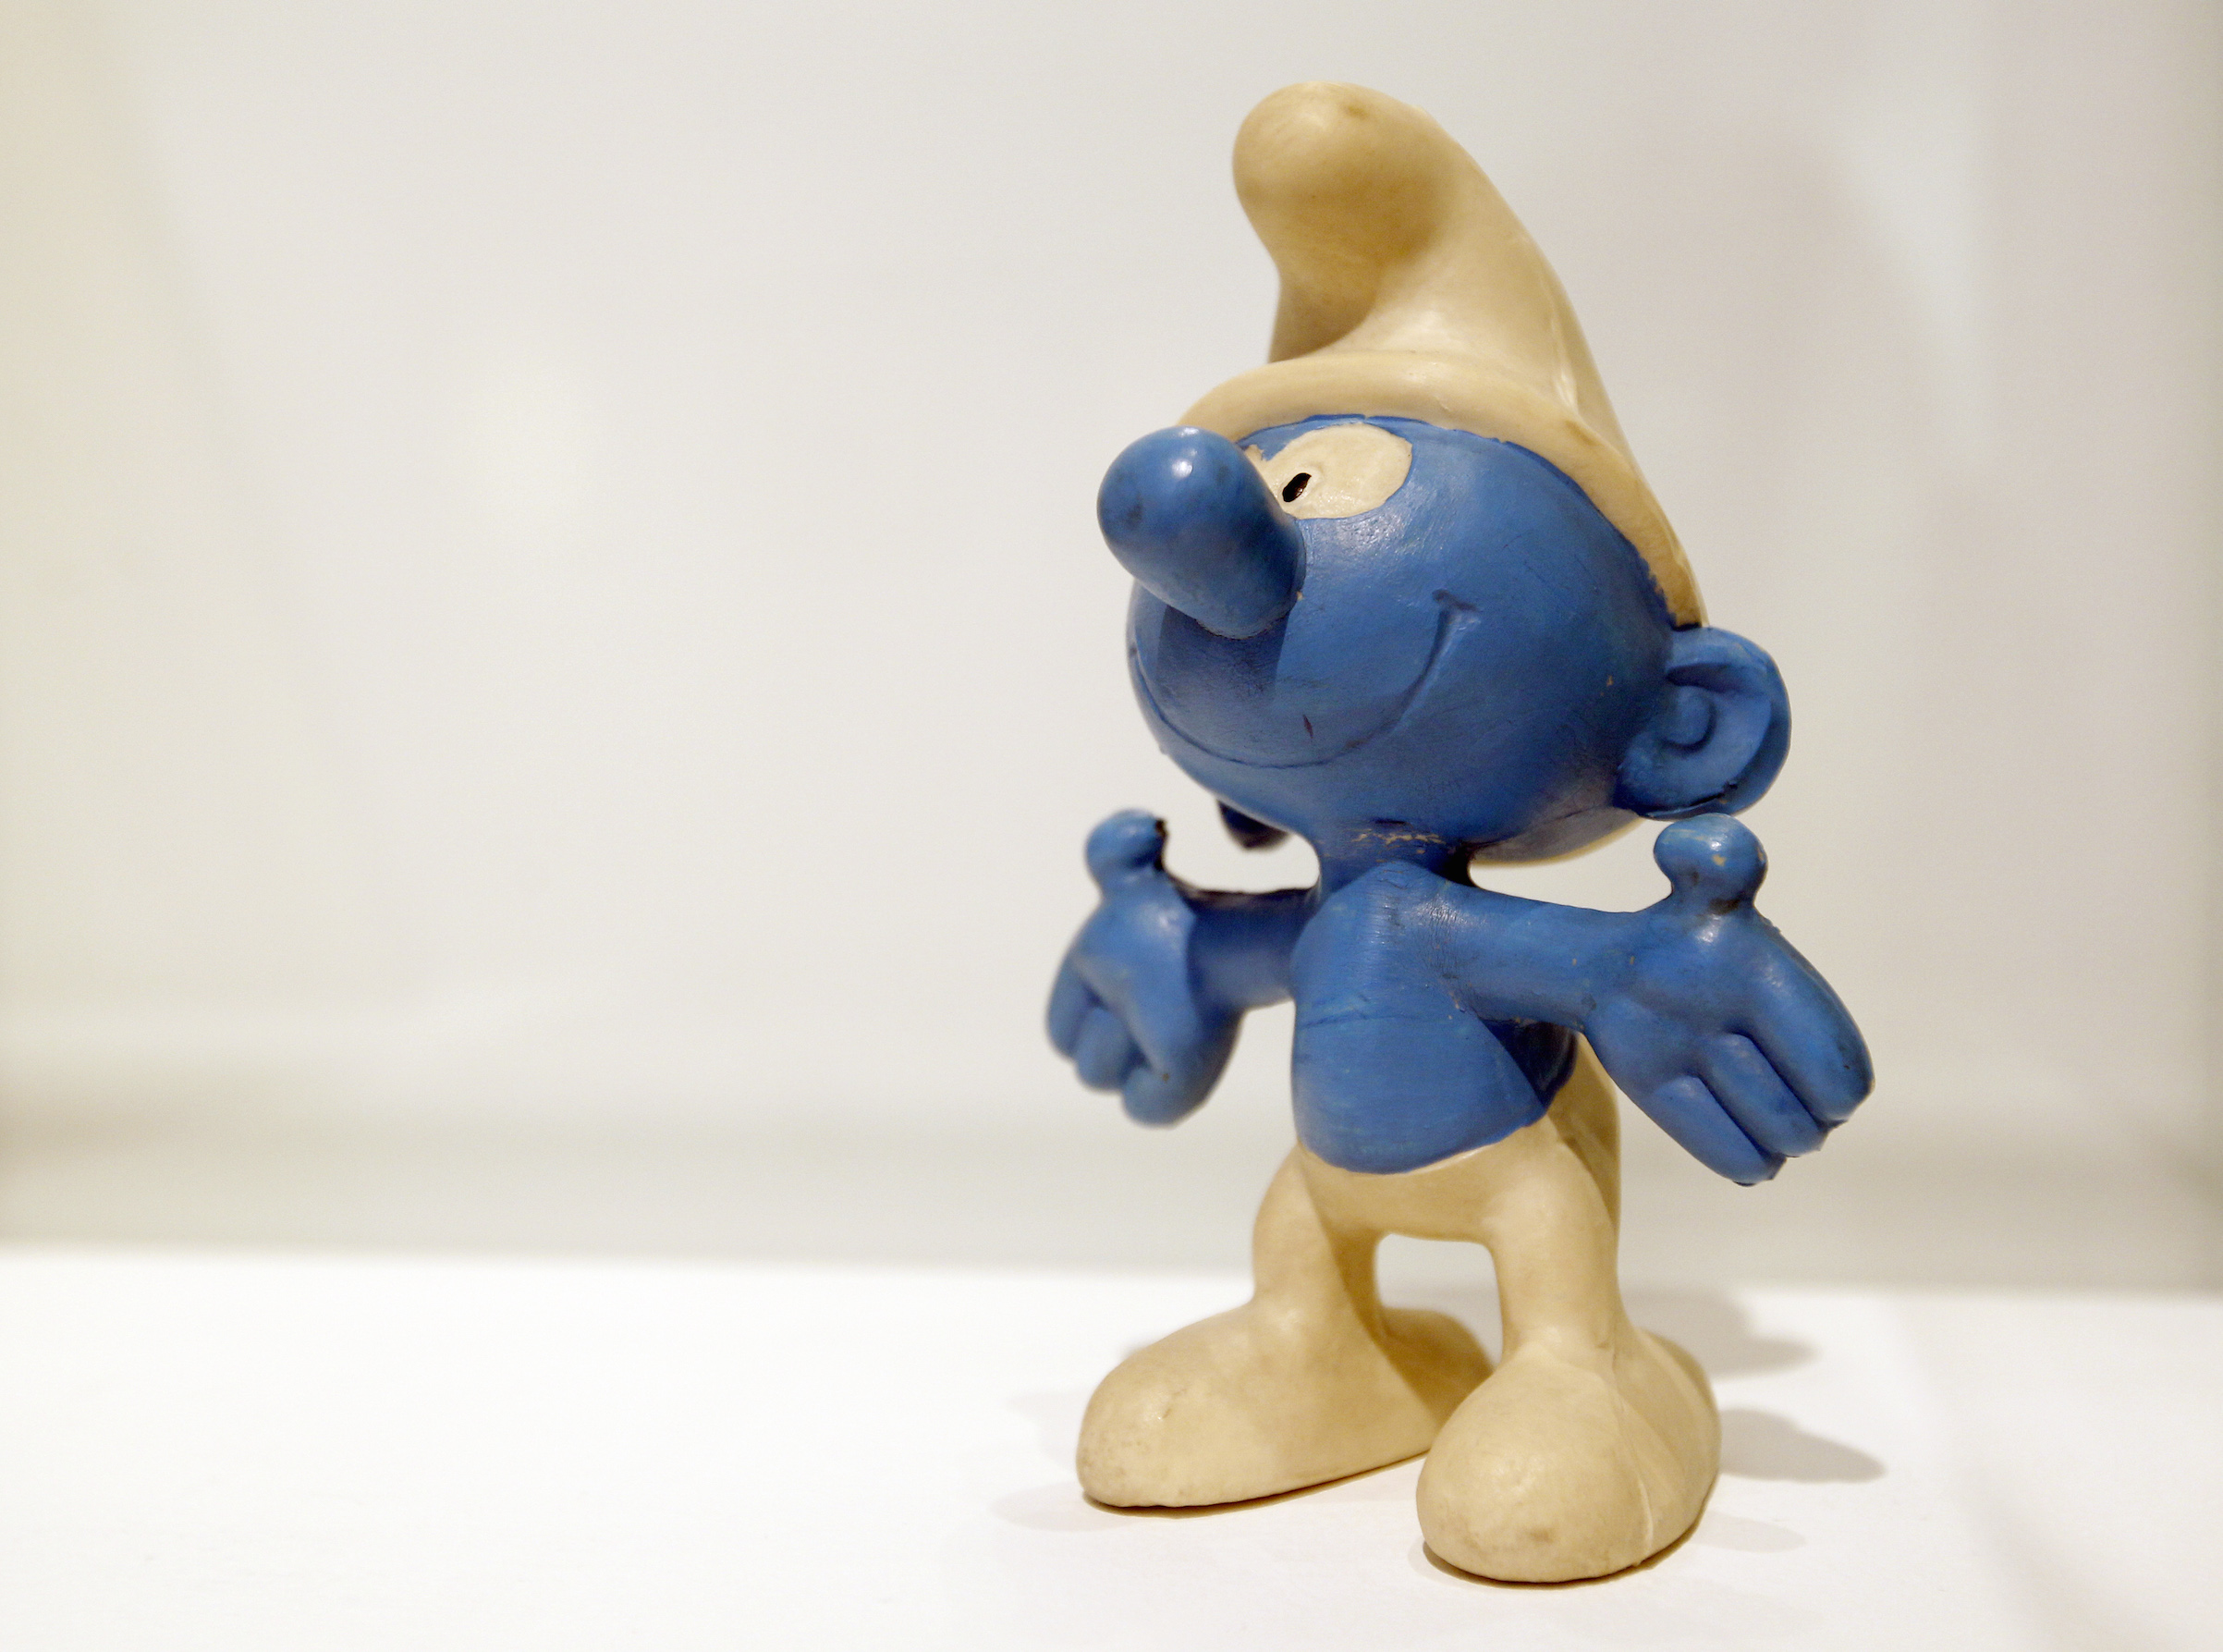 A Smurf (Schtroumpf in French) is displayed during an exhibition entitled "Pierre Culliford, PEYO, the life and and work of a master story-teller" at the Artcurial's saleshouse on July 7, 2011, in Paris. The retrospective showcased over 150 original works, archive material and personal items from Peyo. (Patrick Kovarik—AFP/Getty Images)